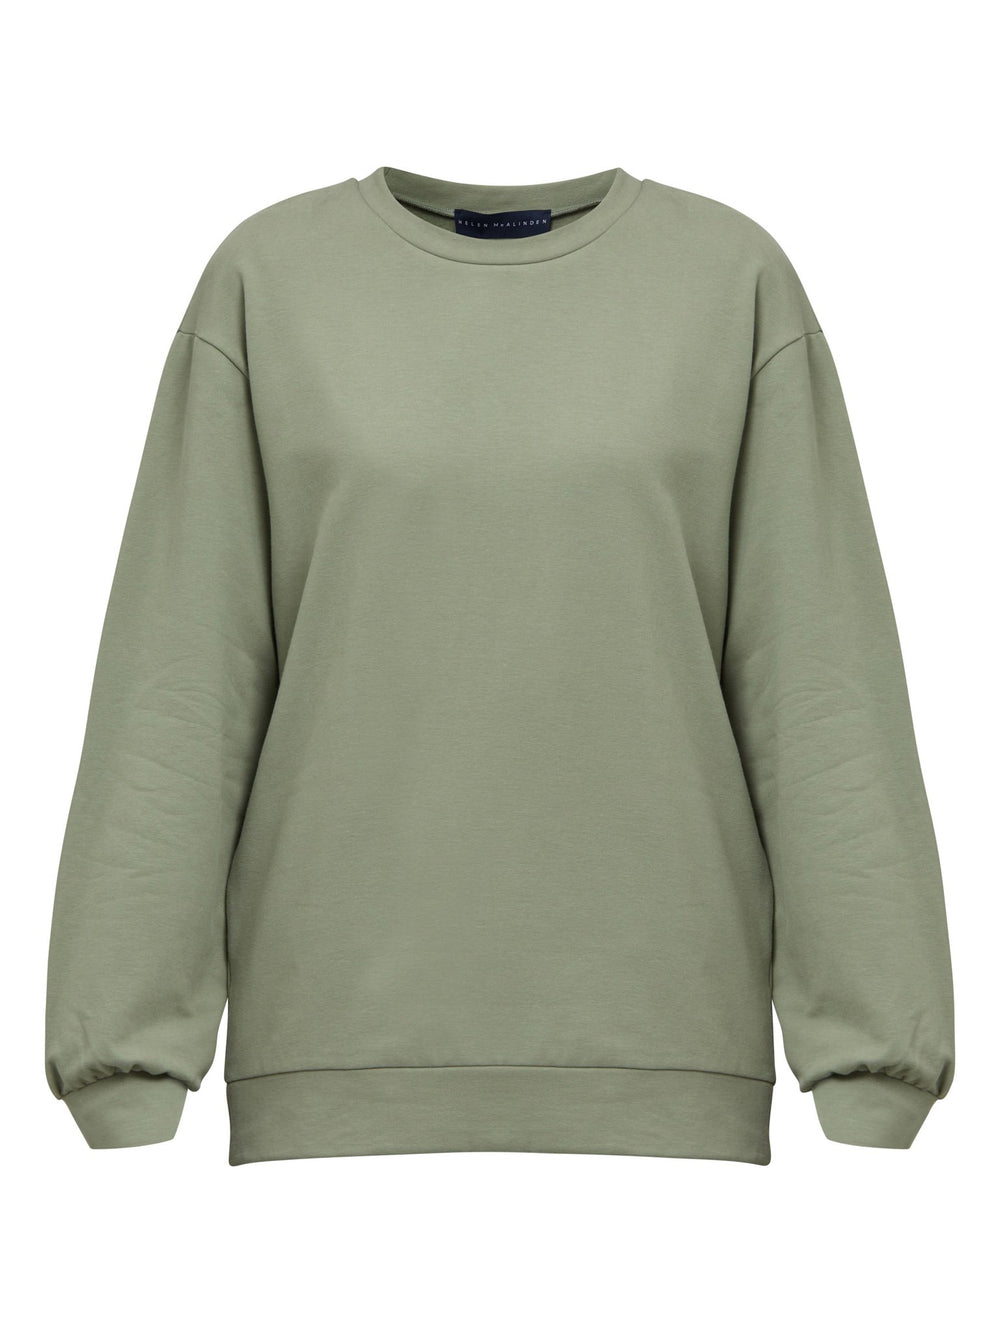 The Khloe tea-green sweatshirt. A Jewel neck oversized jumper with full-length sleeves. Khloe takes you from everyday living to your yoga sessions. Crafted from a premium organic cotton jersey. Designed in Ireland by Helen McAlinden. Made in Europe. Free shipping to the EU & UK.